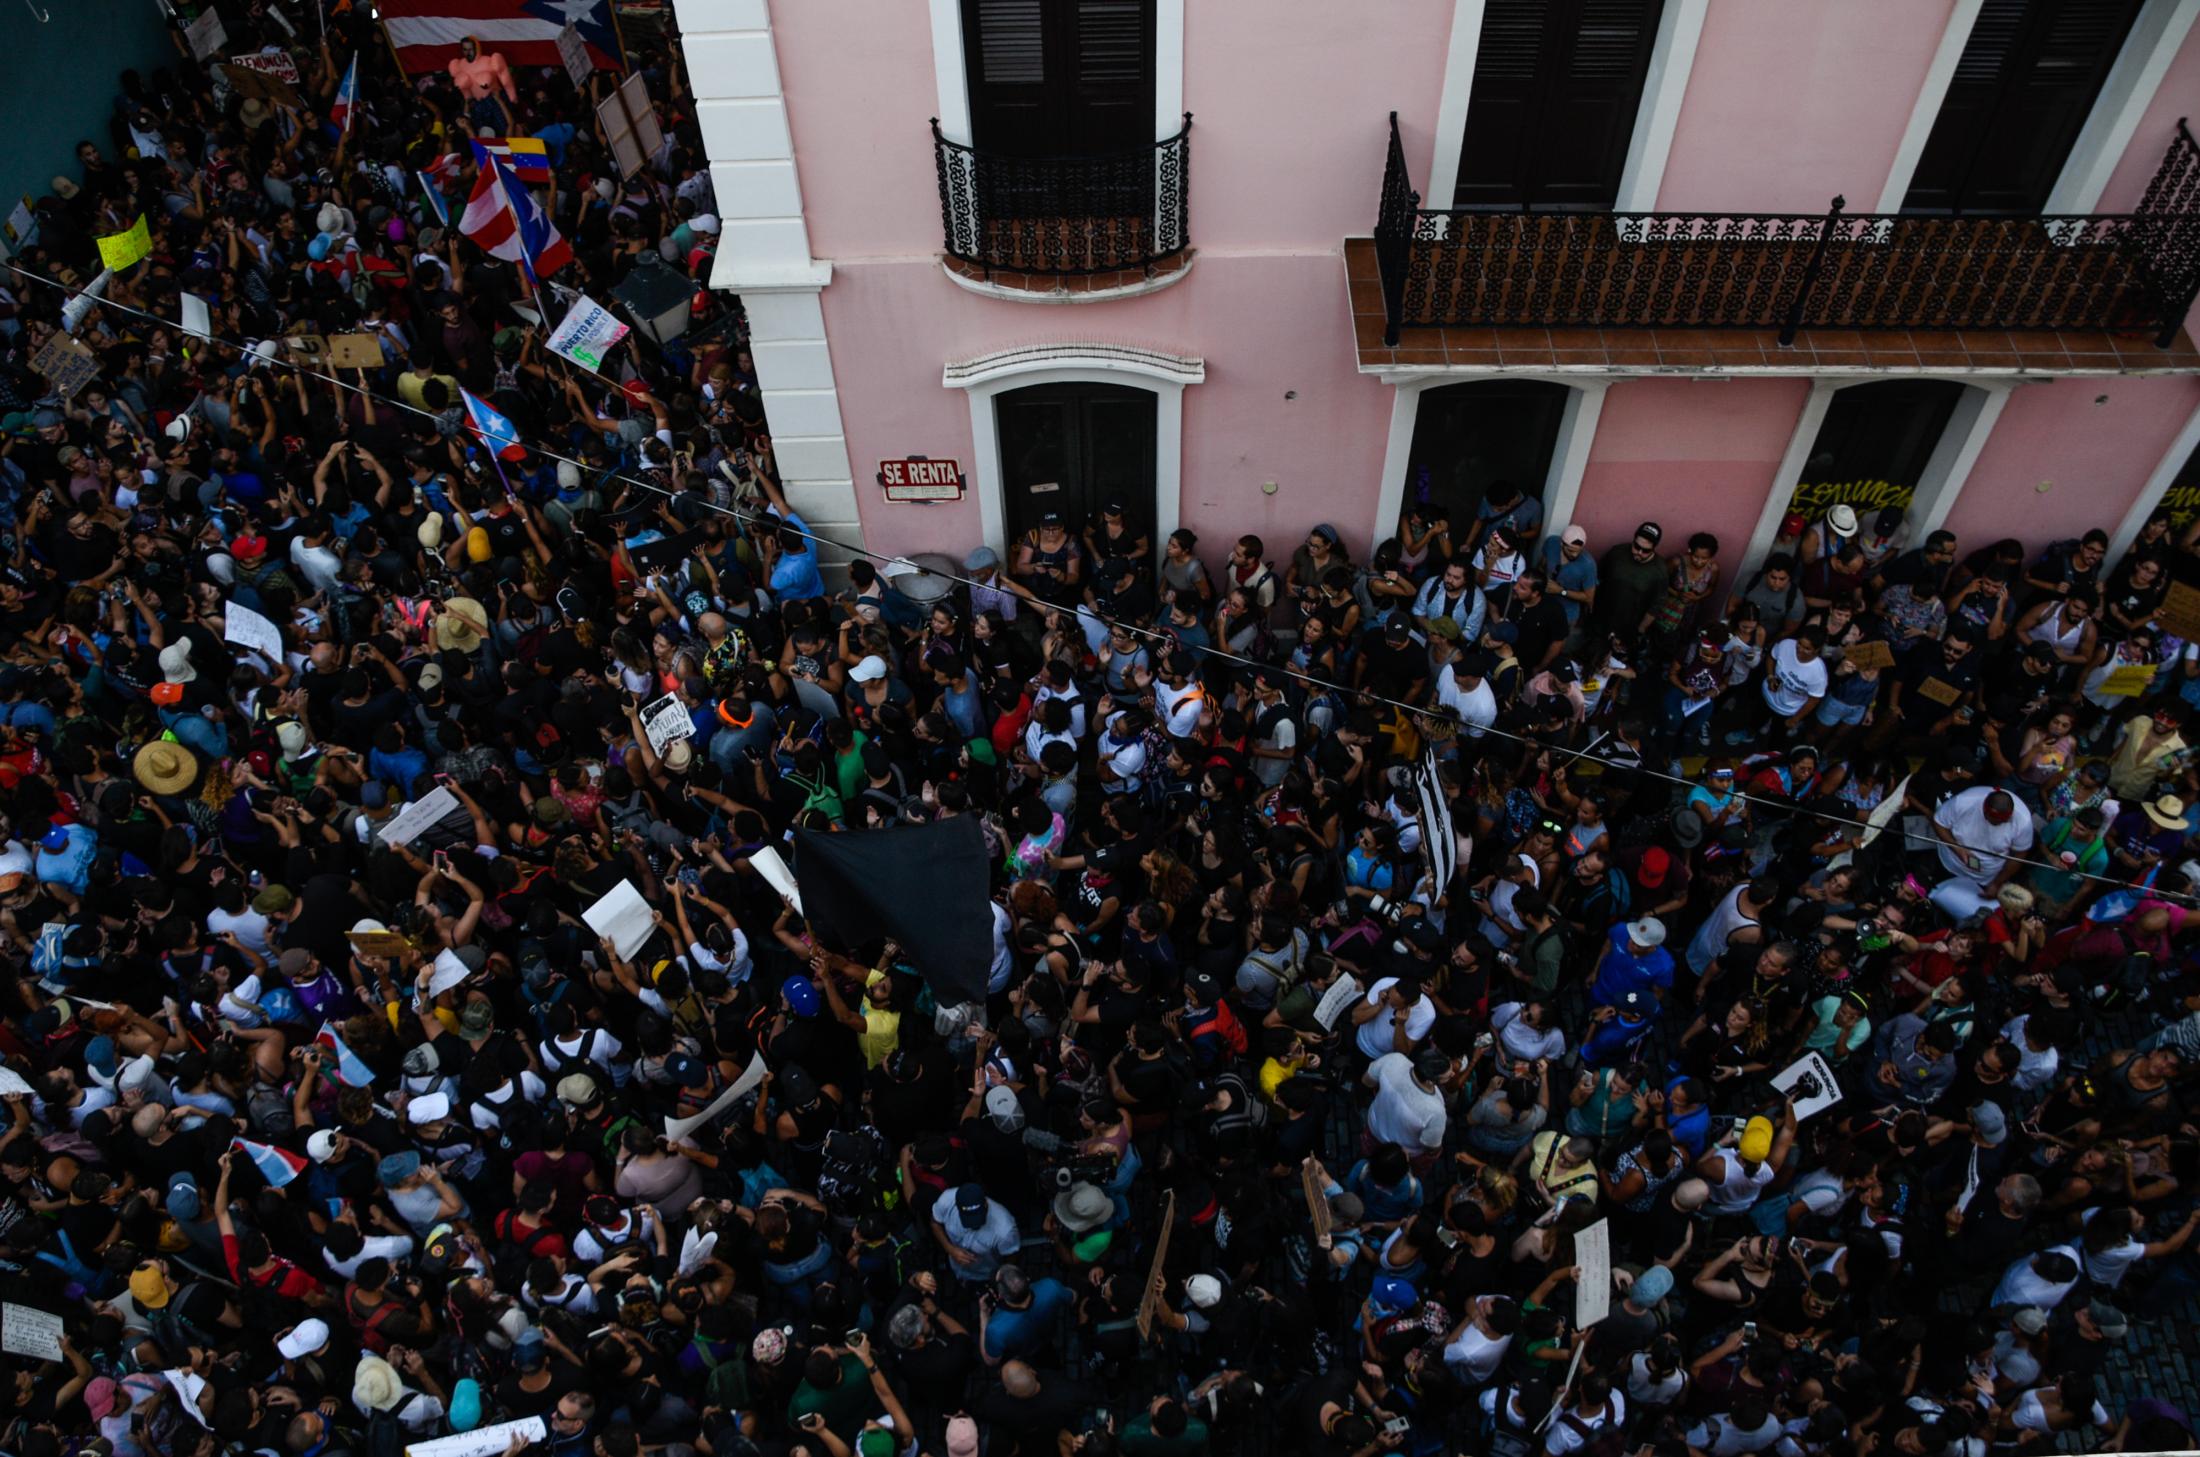 Protest at the Fortaleza.